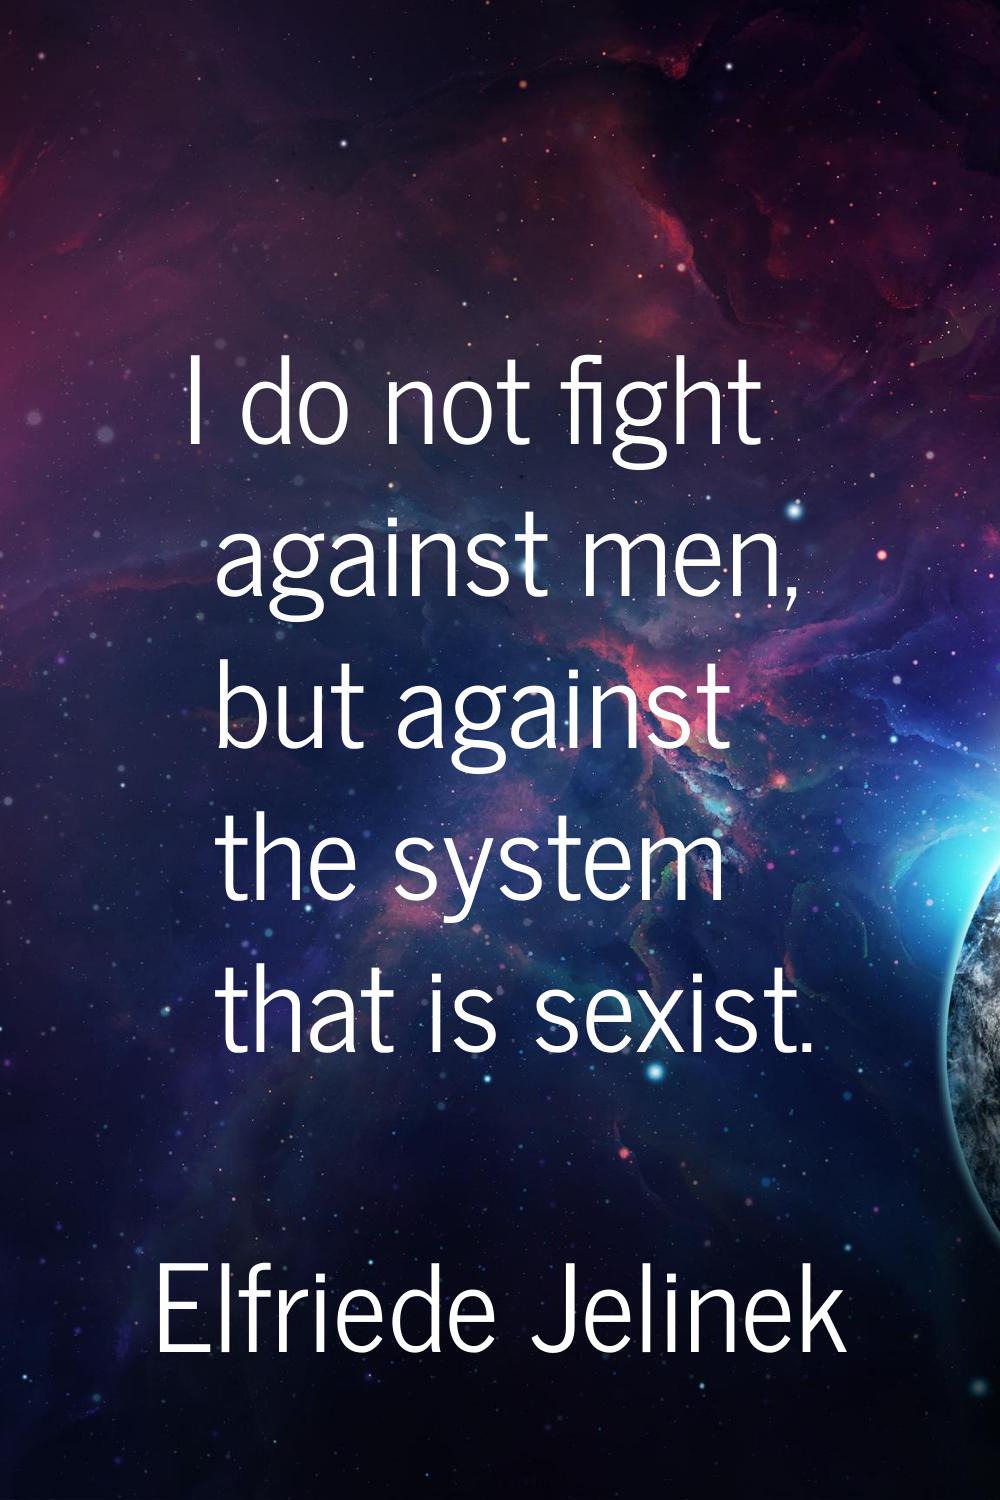 I do not fight against men, but against the system that is sexist.